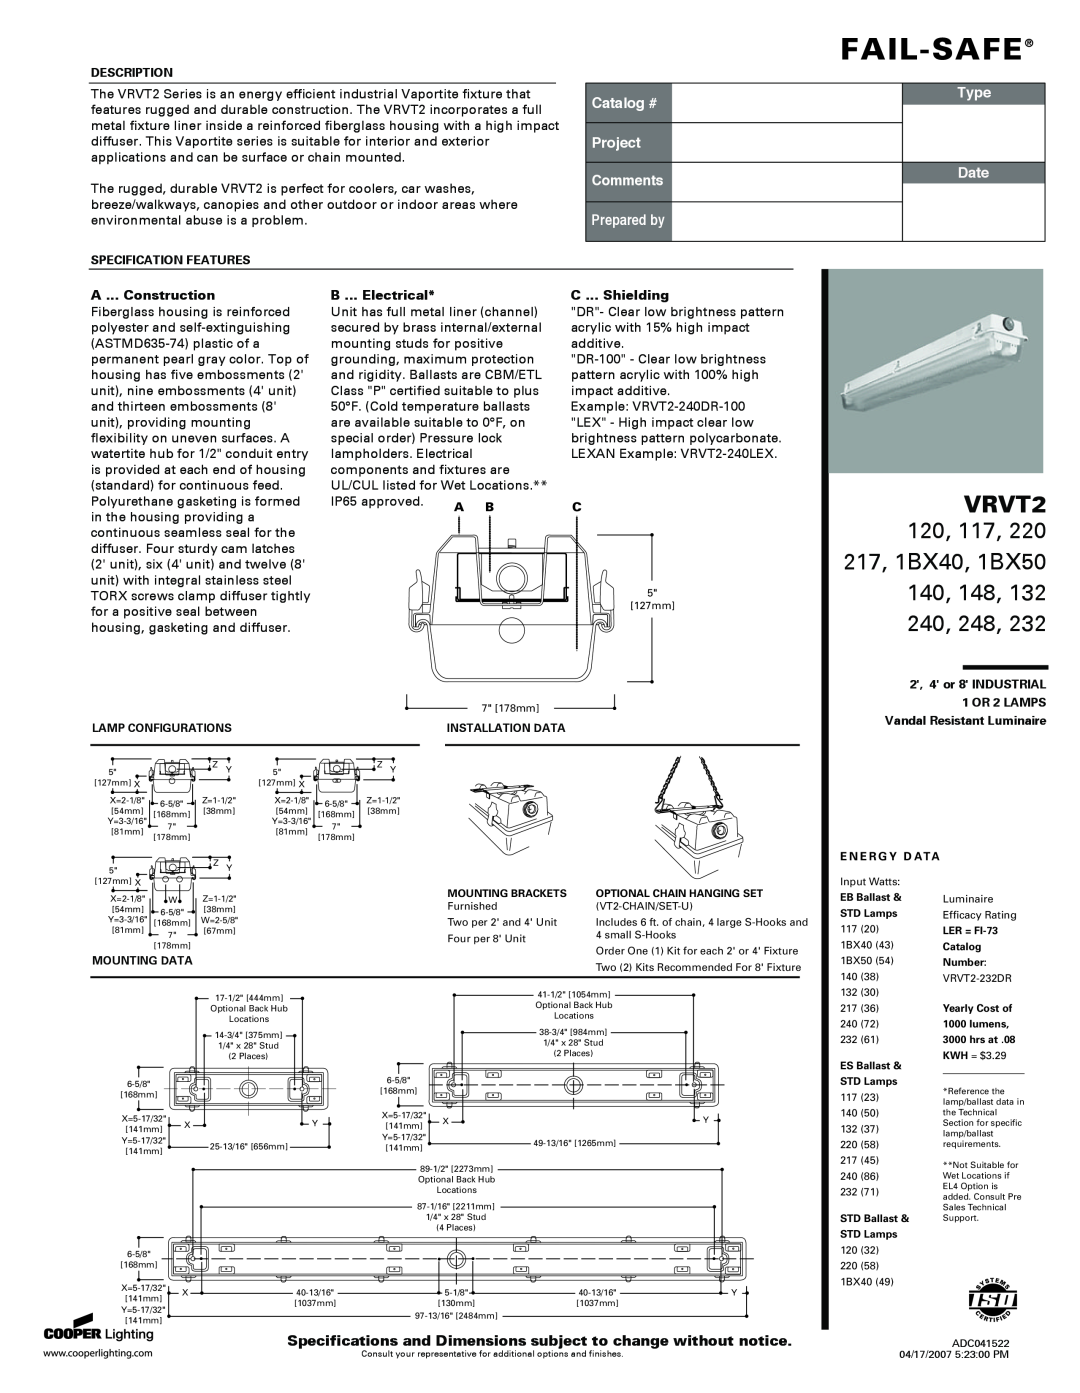 Cooper Lighting VRVT2 specifications Fail-Safe, Catalog #, Project Comments, Prepared by, Type, Date, A ... Construction 